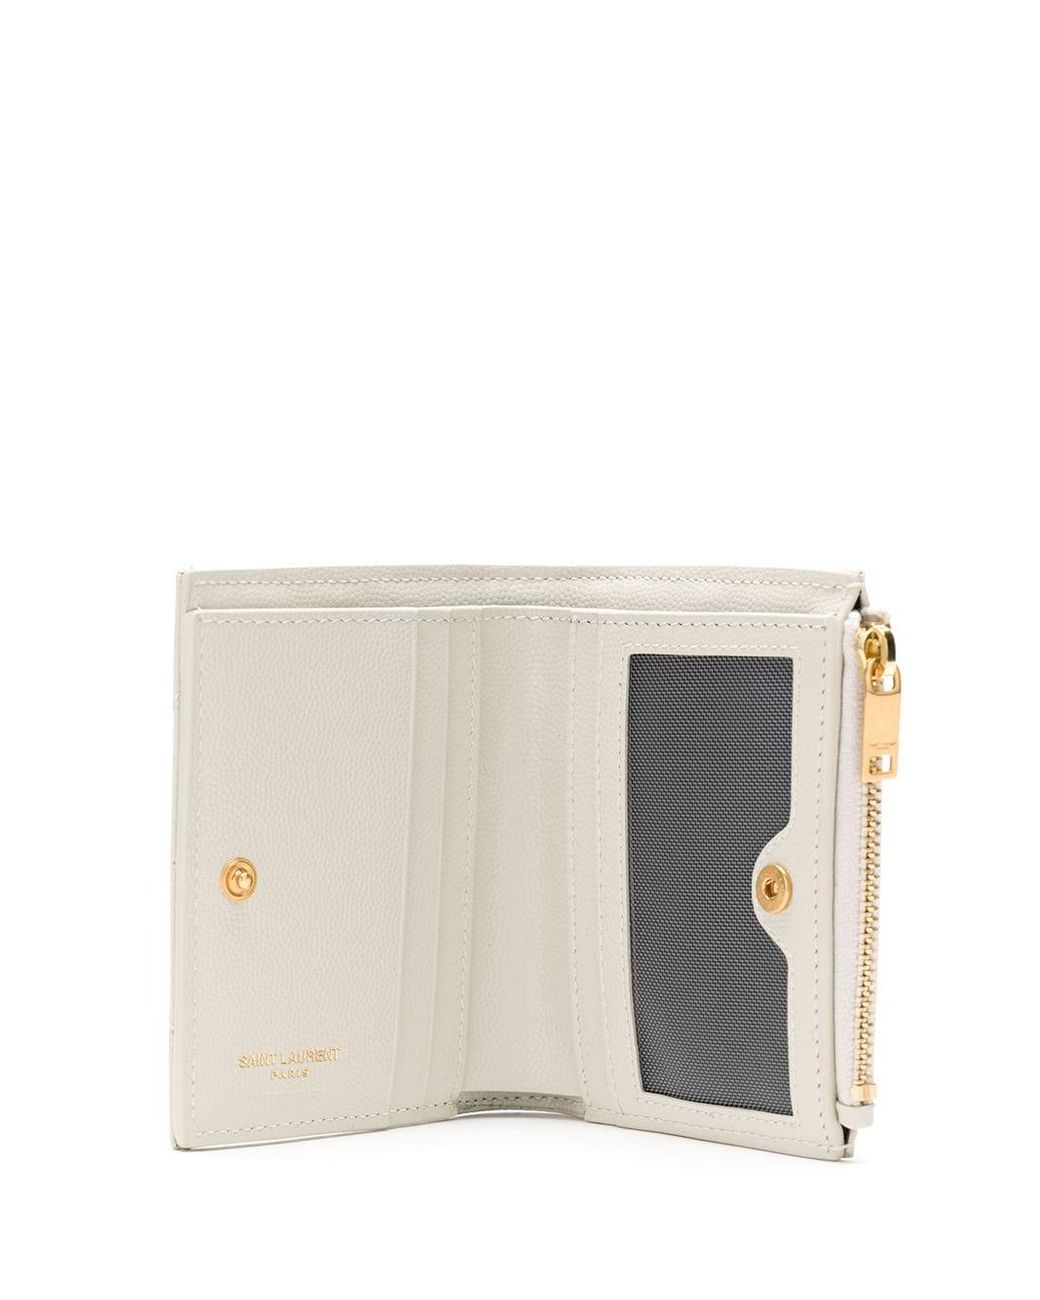 Saint Laurent Monogram Quilted-leather Bi-fold Wallet in White 